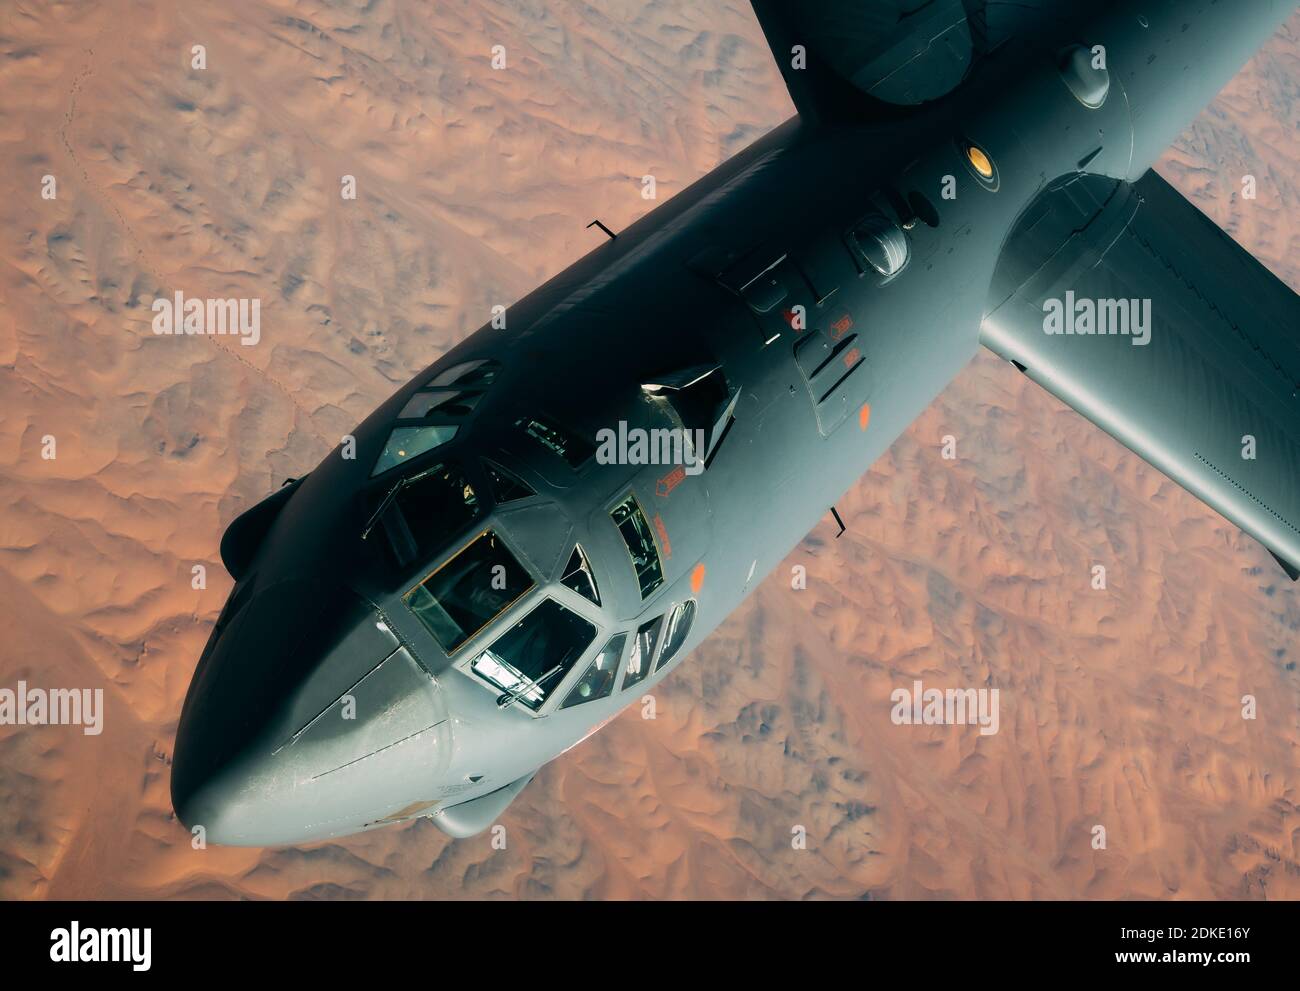 A U.S. Air Force B-52 Stratofortress strategic bomber aircraft from the 2nd Bomb Wing, breaks loose after being refueled inflight from a KC-135 Stratotanker aircraft during a multi-day Bomber Task Force mission December 10, 2020 over Qatar. The bomber was relocated to the region following an increase in tensions with Iran. Stock Photo